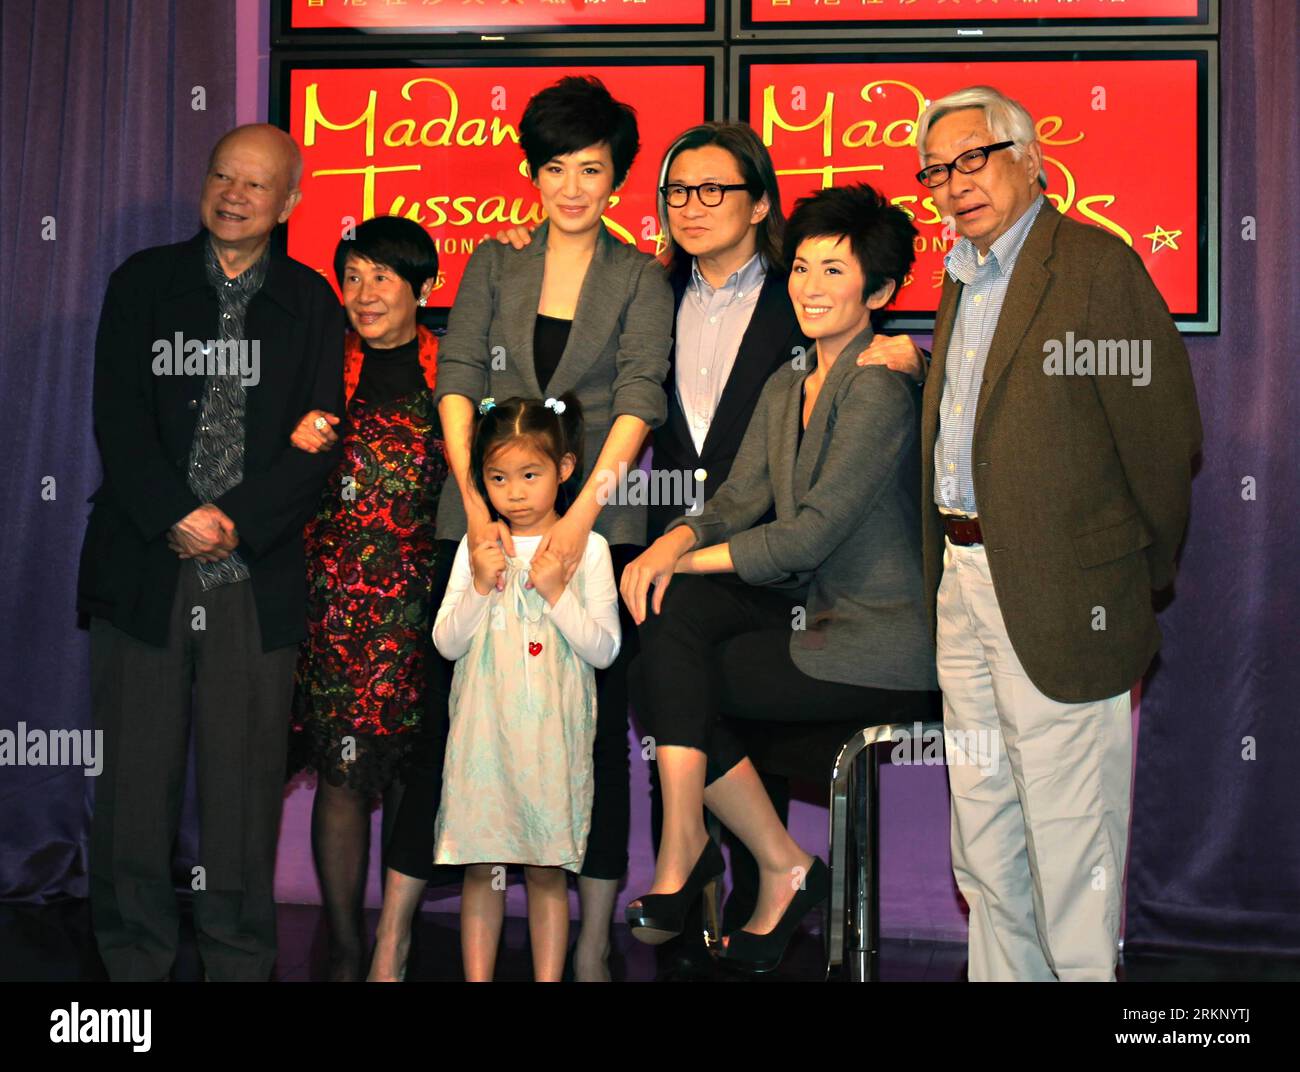 Bildnummer: 57720629  Datum: 28.03.2012  Copyright: imago/Xinhua (120328) -- HONG KONG, March 28, 2012 (Xinhua) -- Hong Kong film and television actress Sandra Ng (3rd L, back) and her famliy pose with her wax figure at the Madame Tussauds Wax Museum in Hong Kong, south China, March 28, 2012. The wax figure of Sandra Ng was unveiled at the Madame Tussauds Wax Museum in Hong Kong on Wednesday. (Xinhua/Jin Yi) (zhs) CHINA-HONG KONG-SANDRA NG-WAX FIGURE (CN) PUBLICATIONxNOTxINxCHN People Entertainment Film Wachsfigur Figur Wachsfigurenkabinett Tussaud x0x xst 2012 quer      57720629 Date 28 03 20 Stock Photo